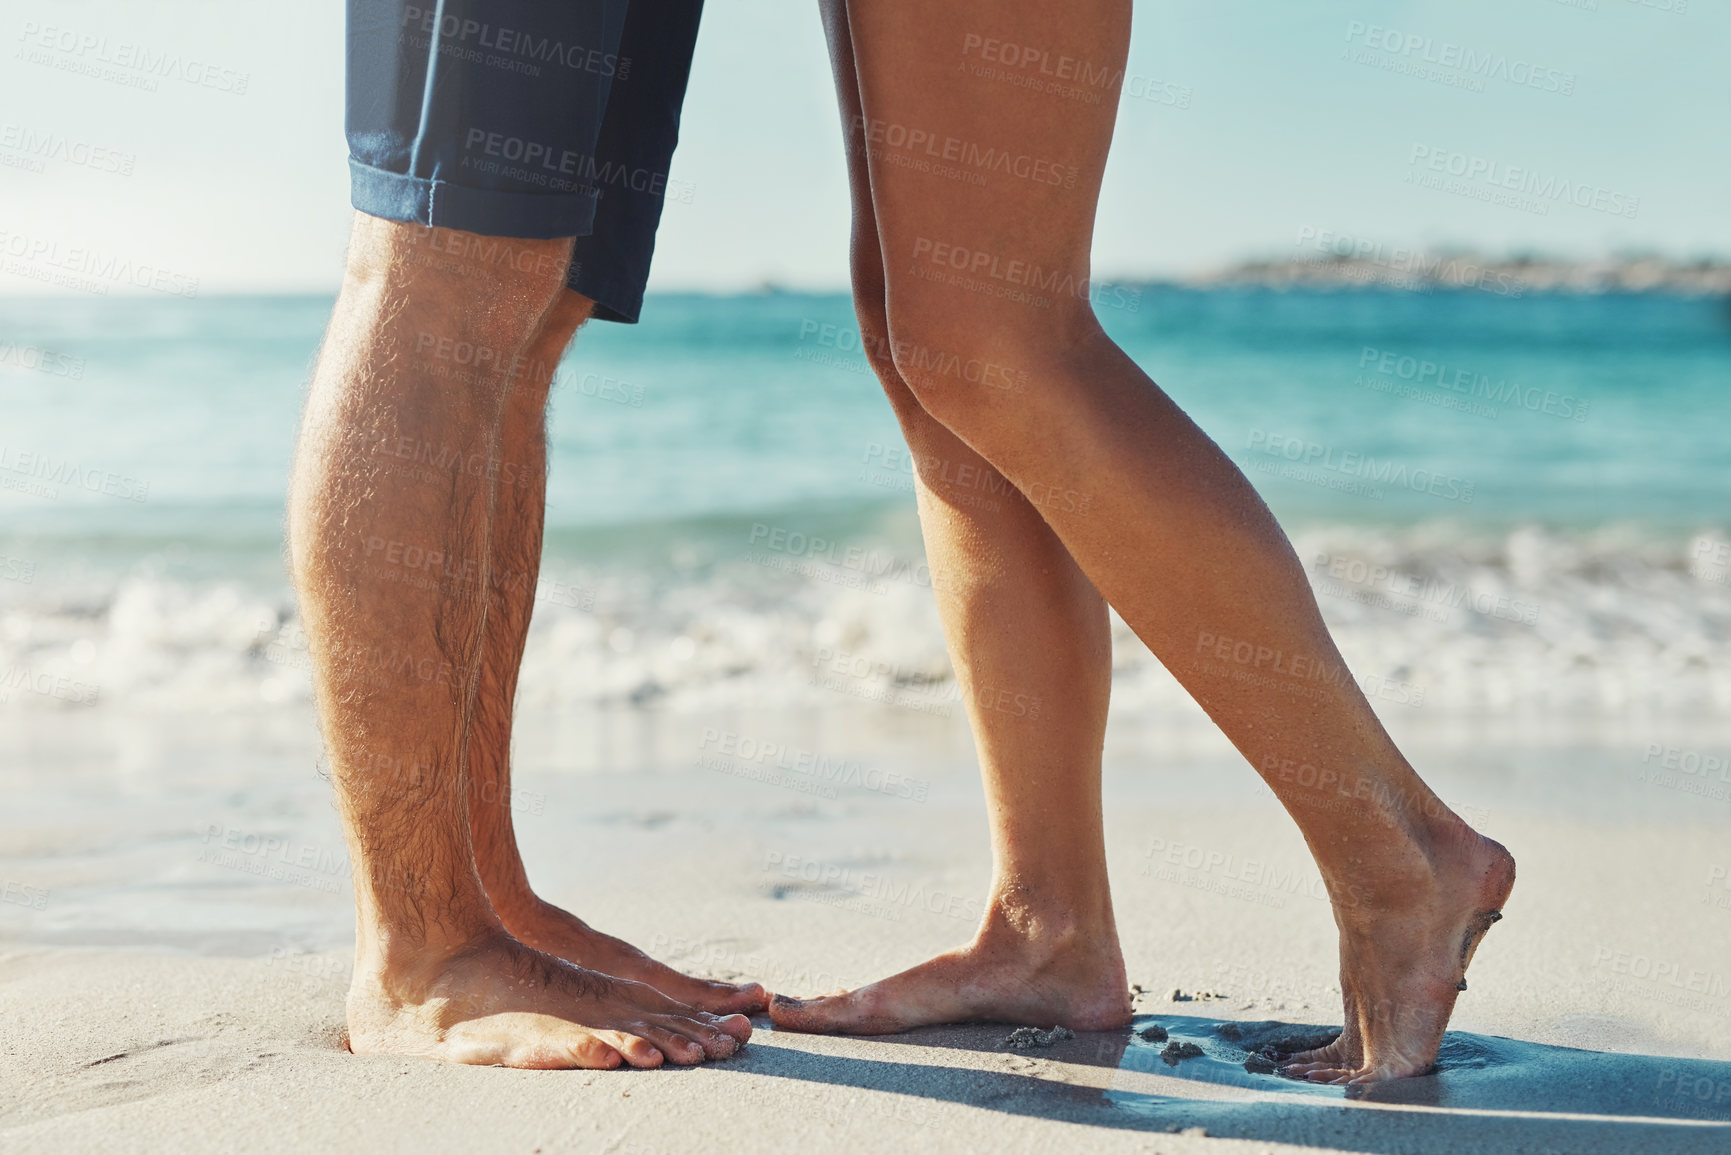 Buy stock photo Cropped shot of an unrecognizable couple standing together by the water’s edge at the beach